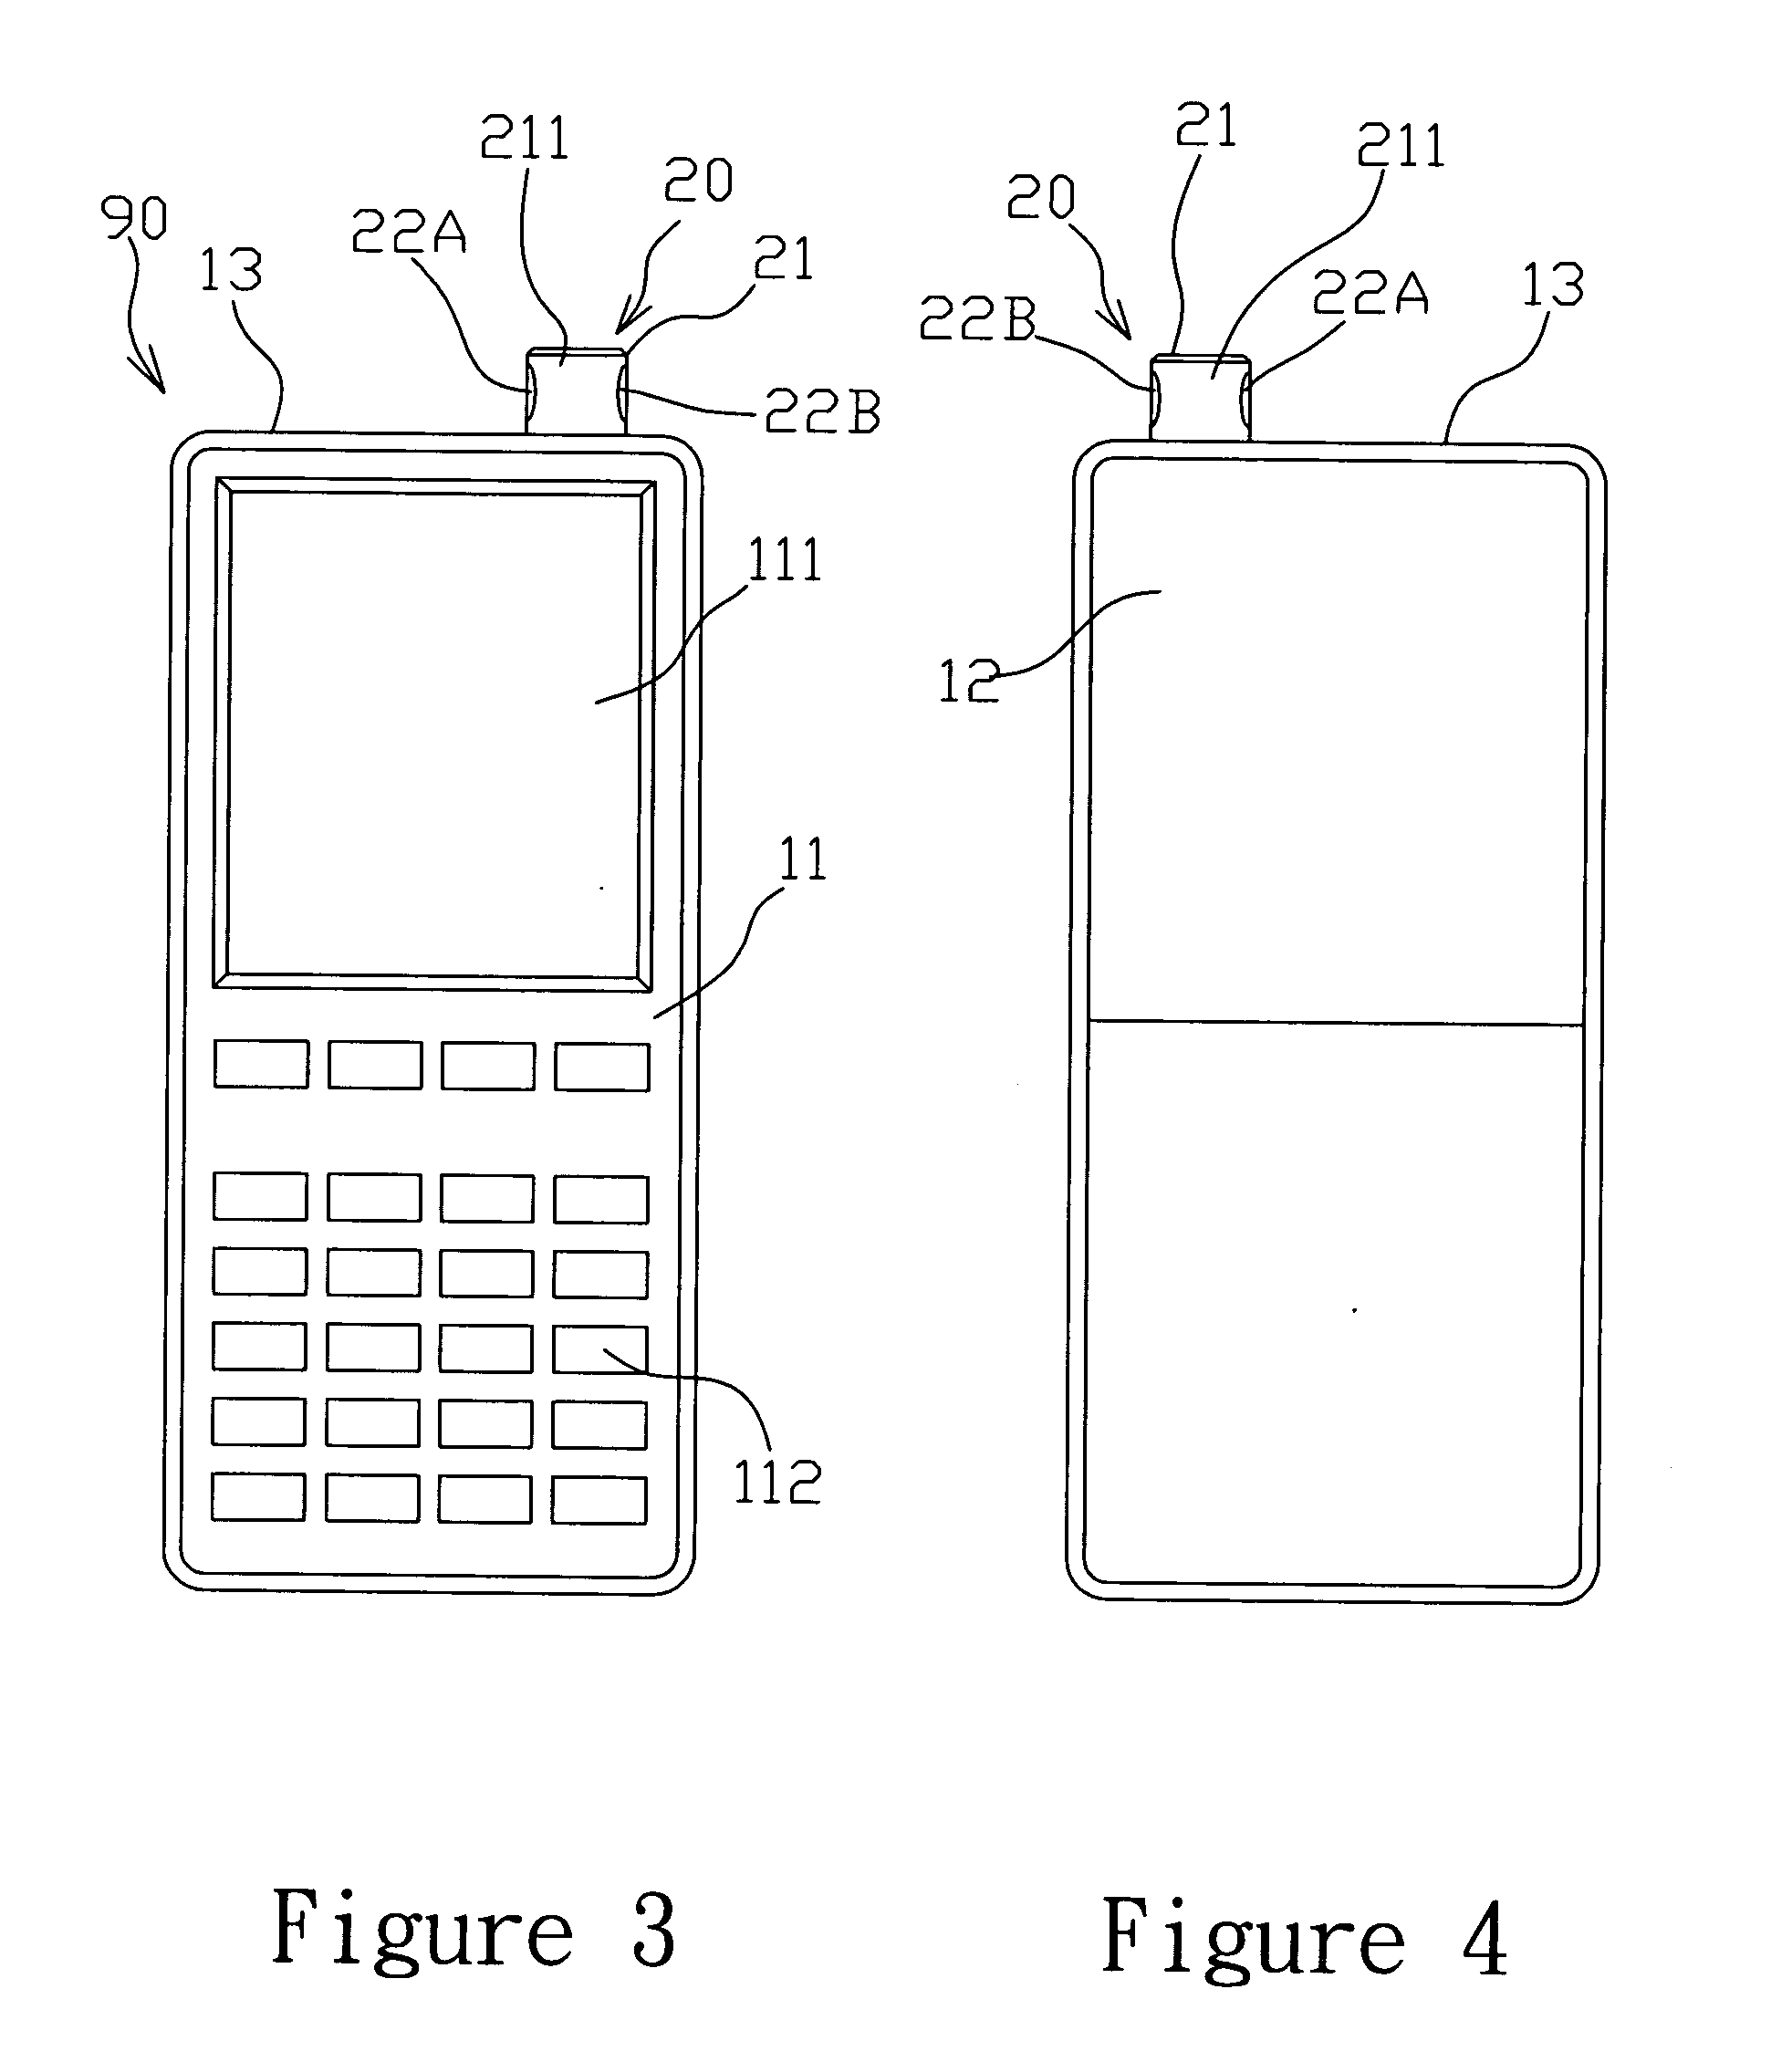 Structure of photographic apparatus